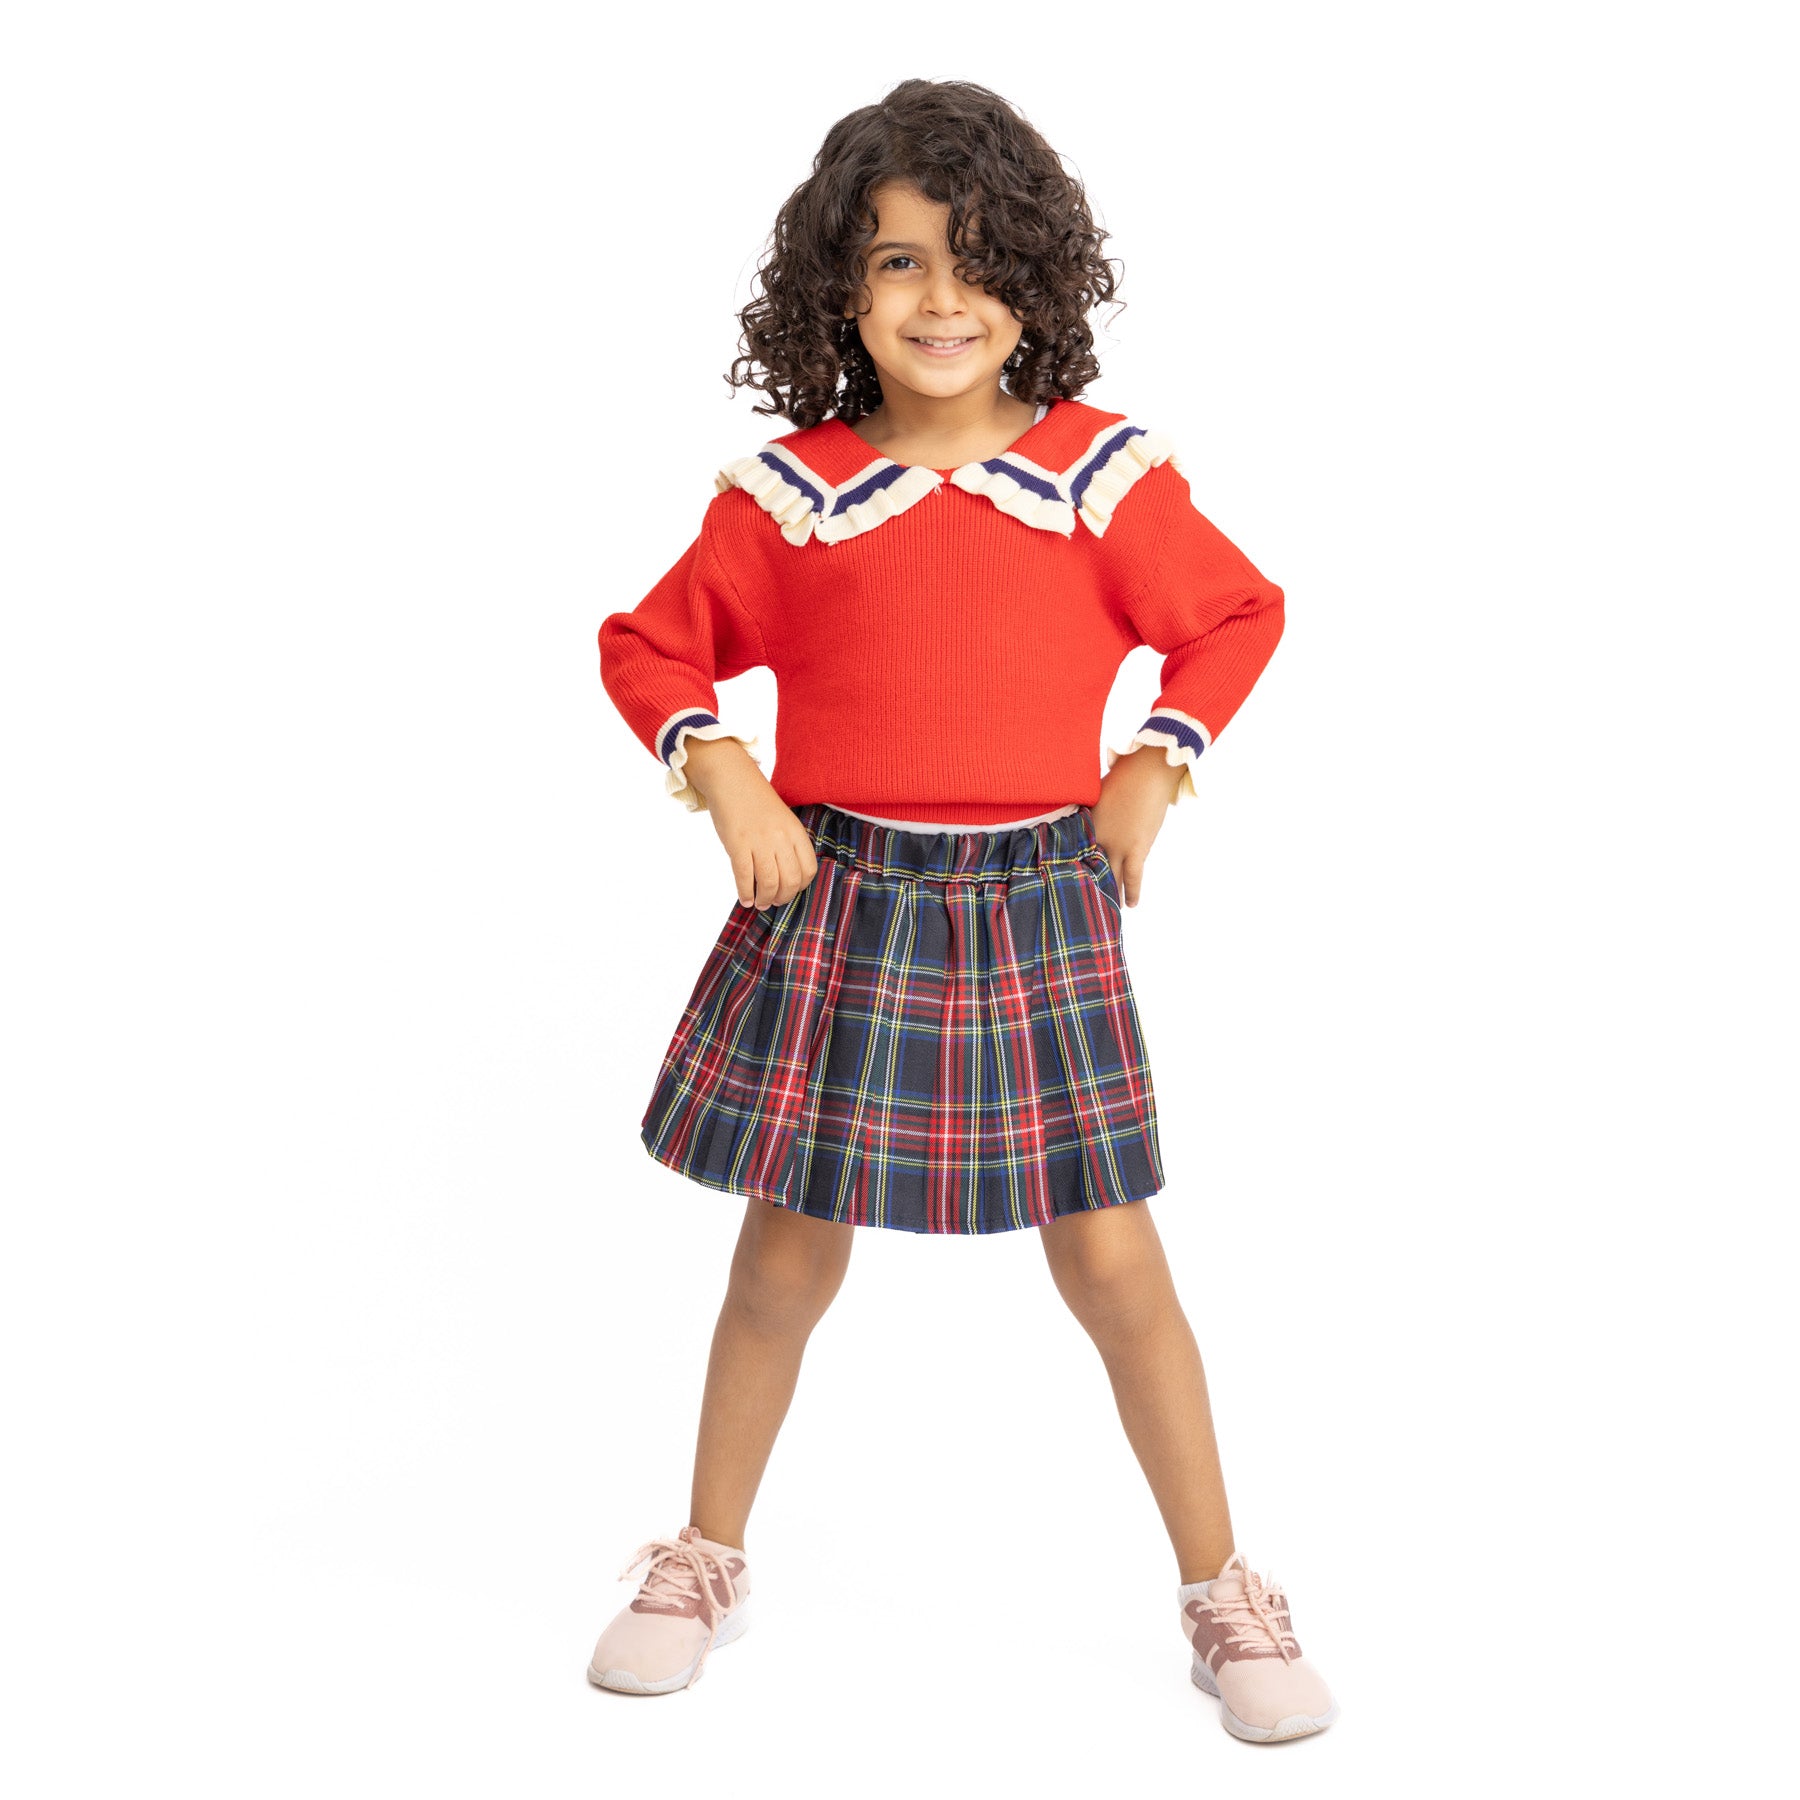 set of red shirt with decorations and a stripped skirt